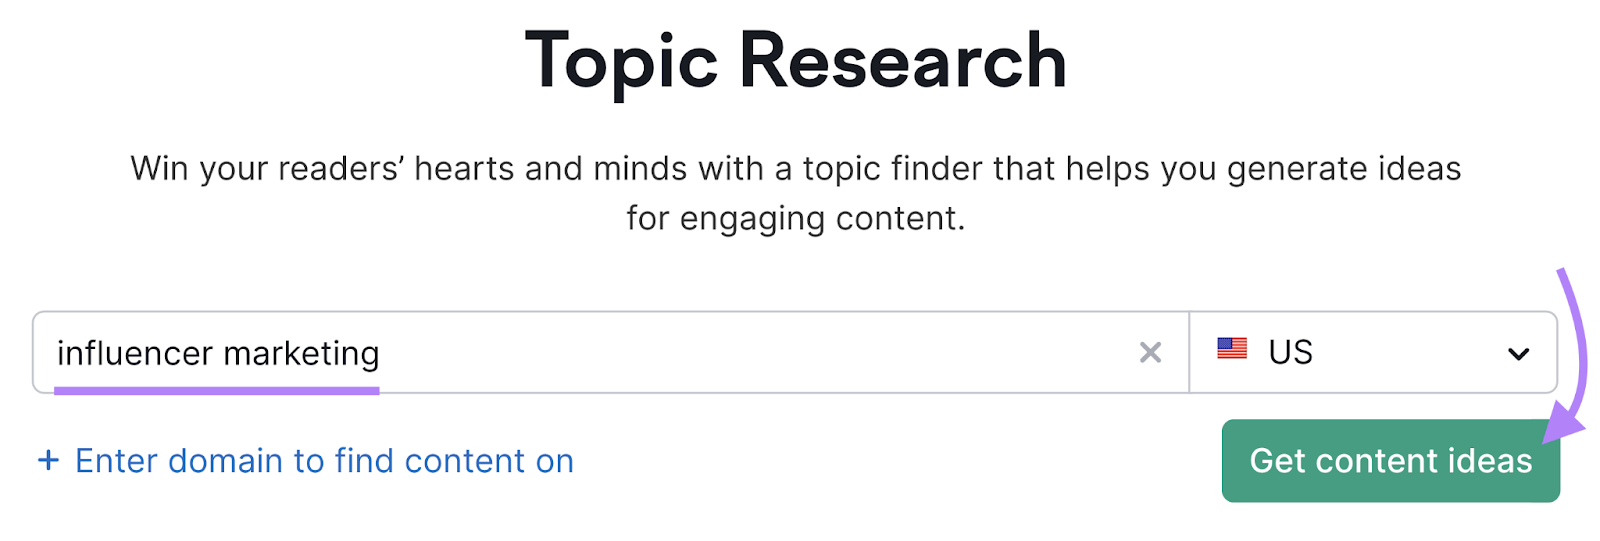 search for "influencer marketing" in Topic Research tool